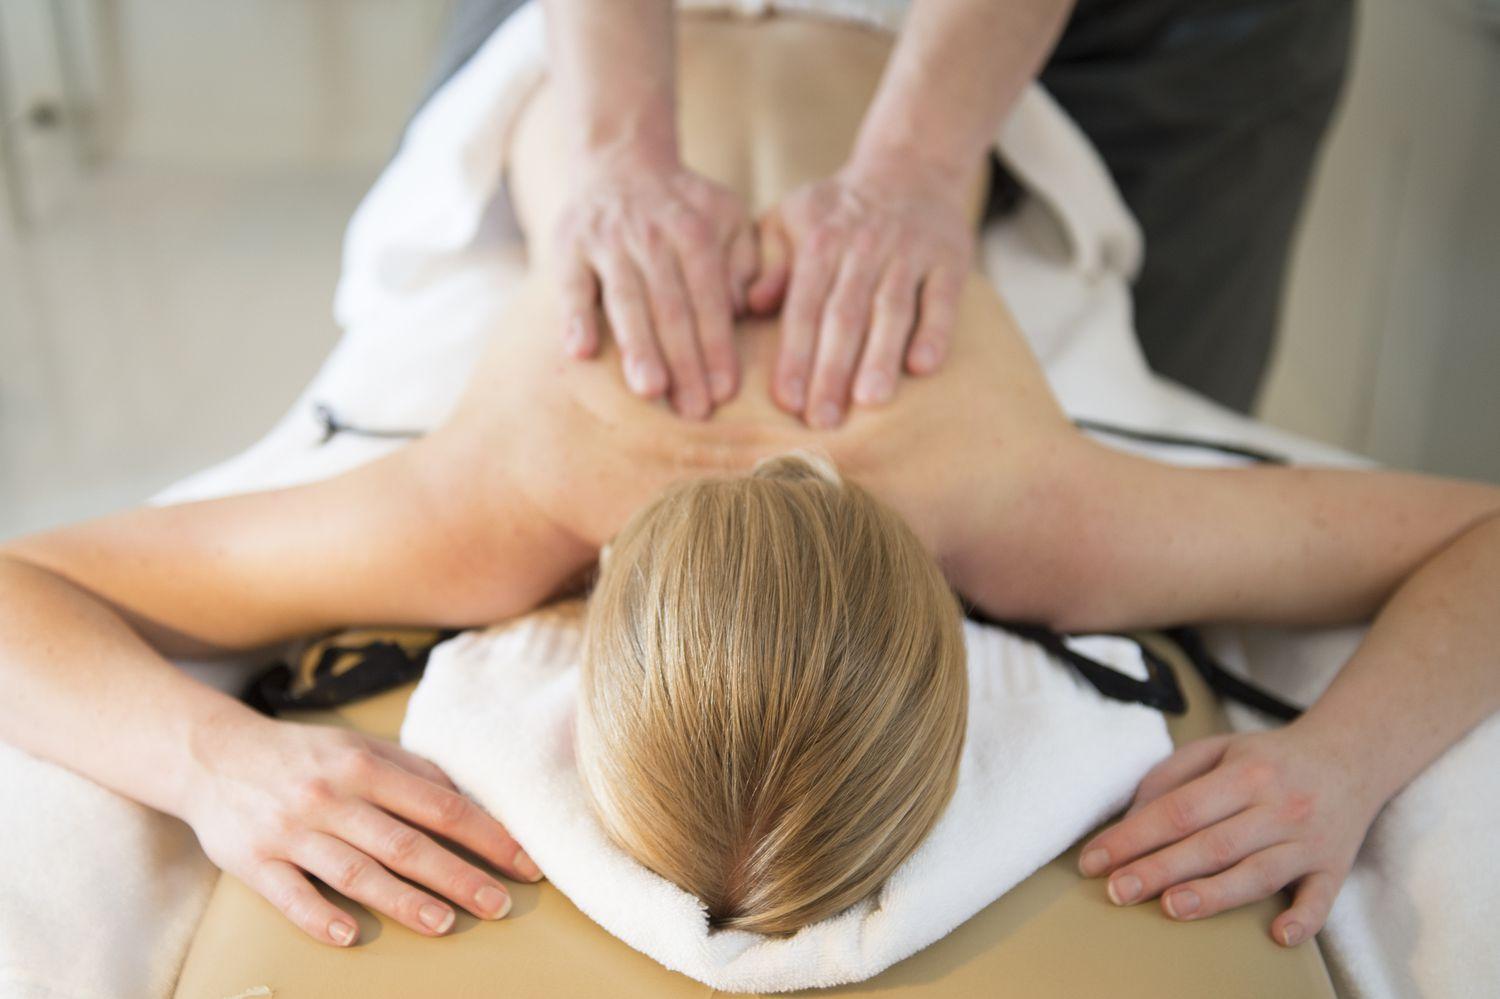 Can getting a massage help with pain